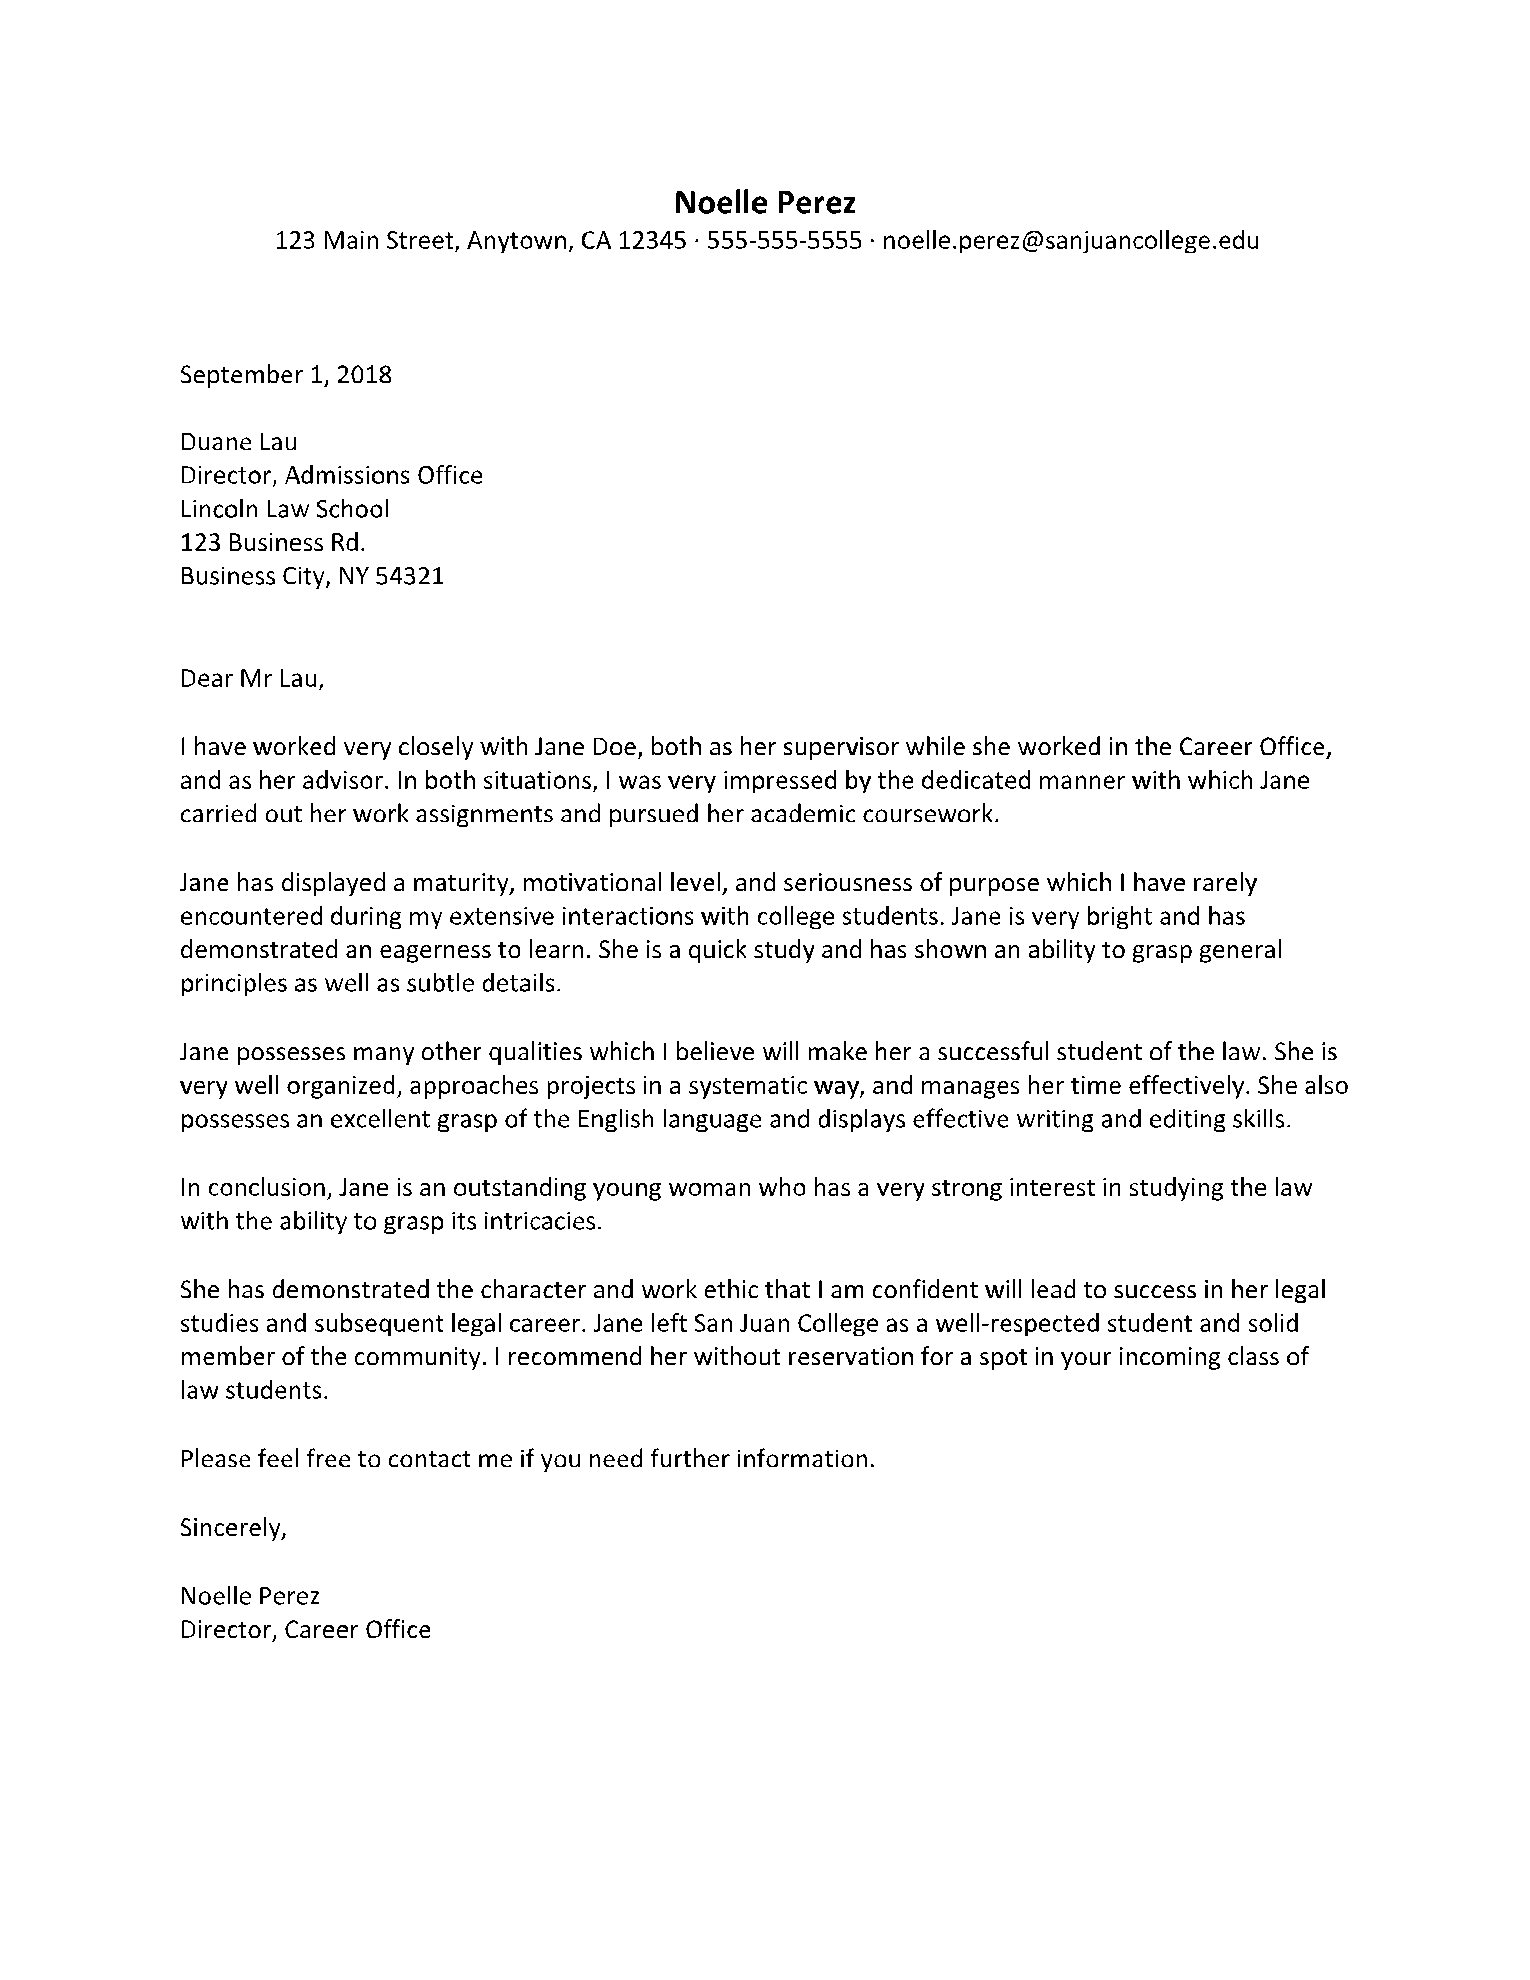 Letter of Recommendation for Law School